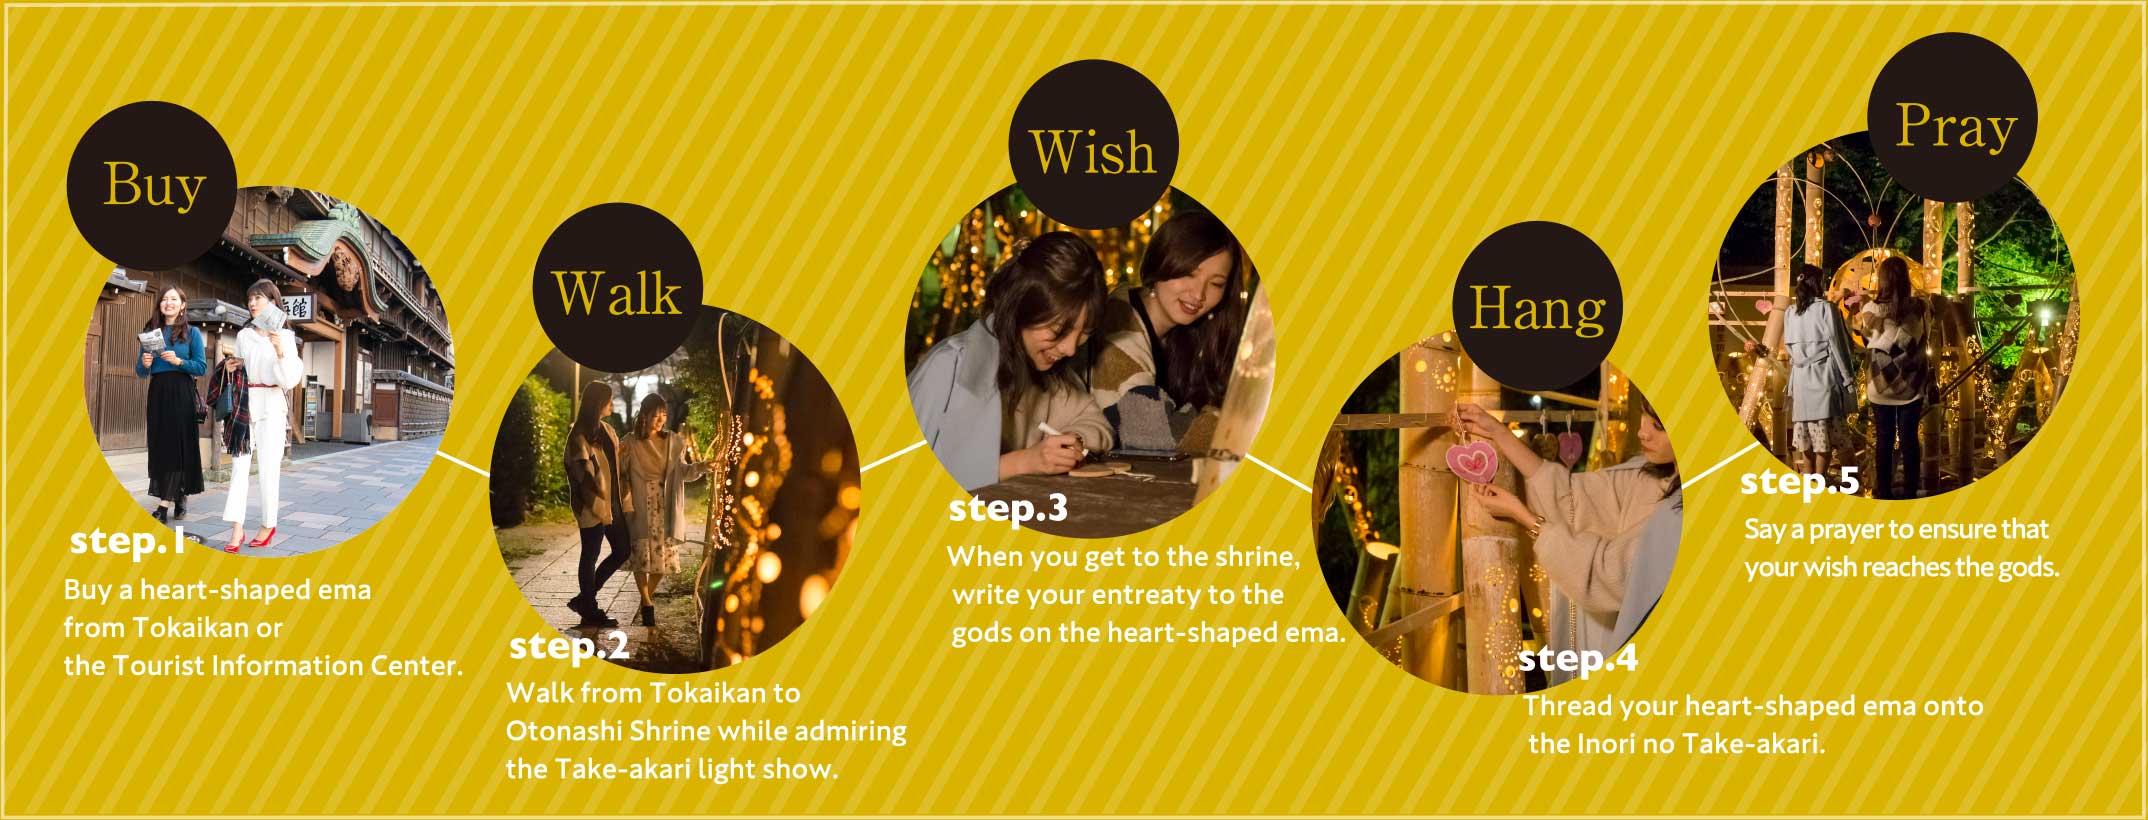 How to make your wish